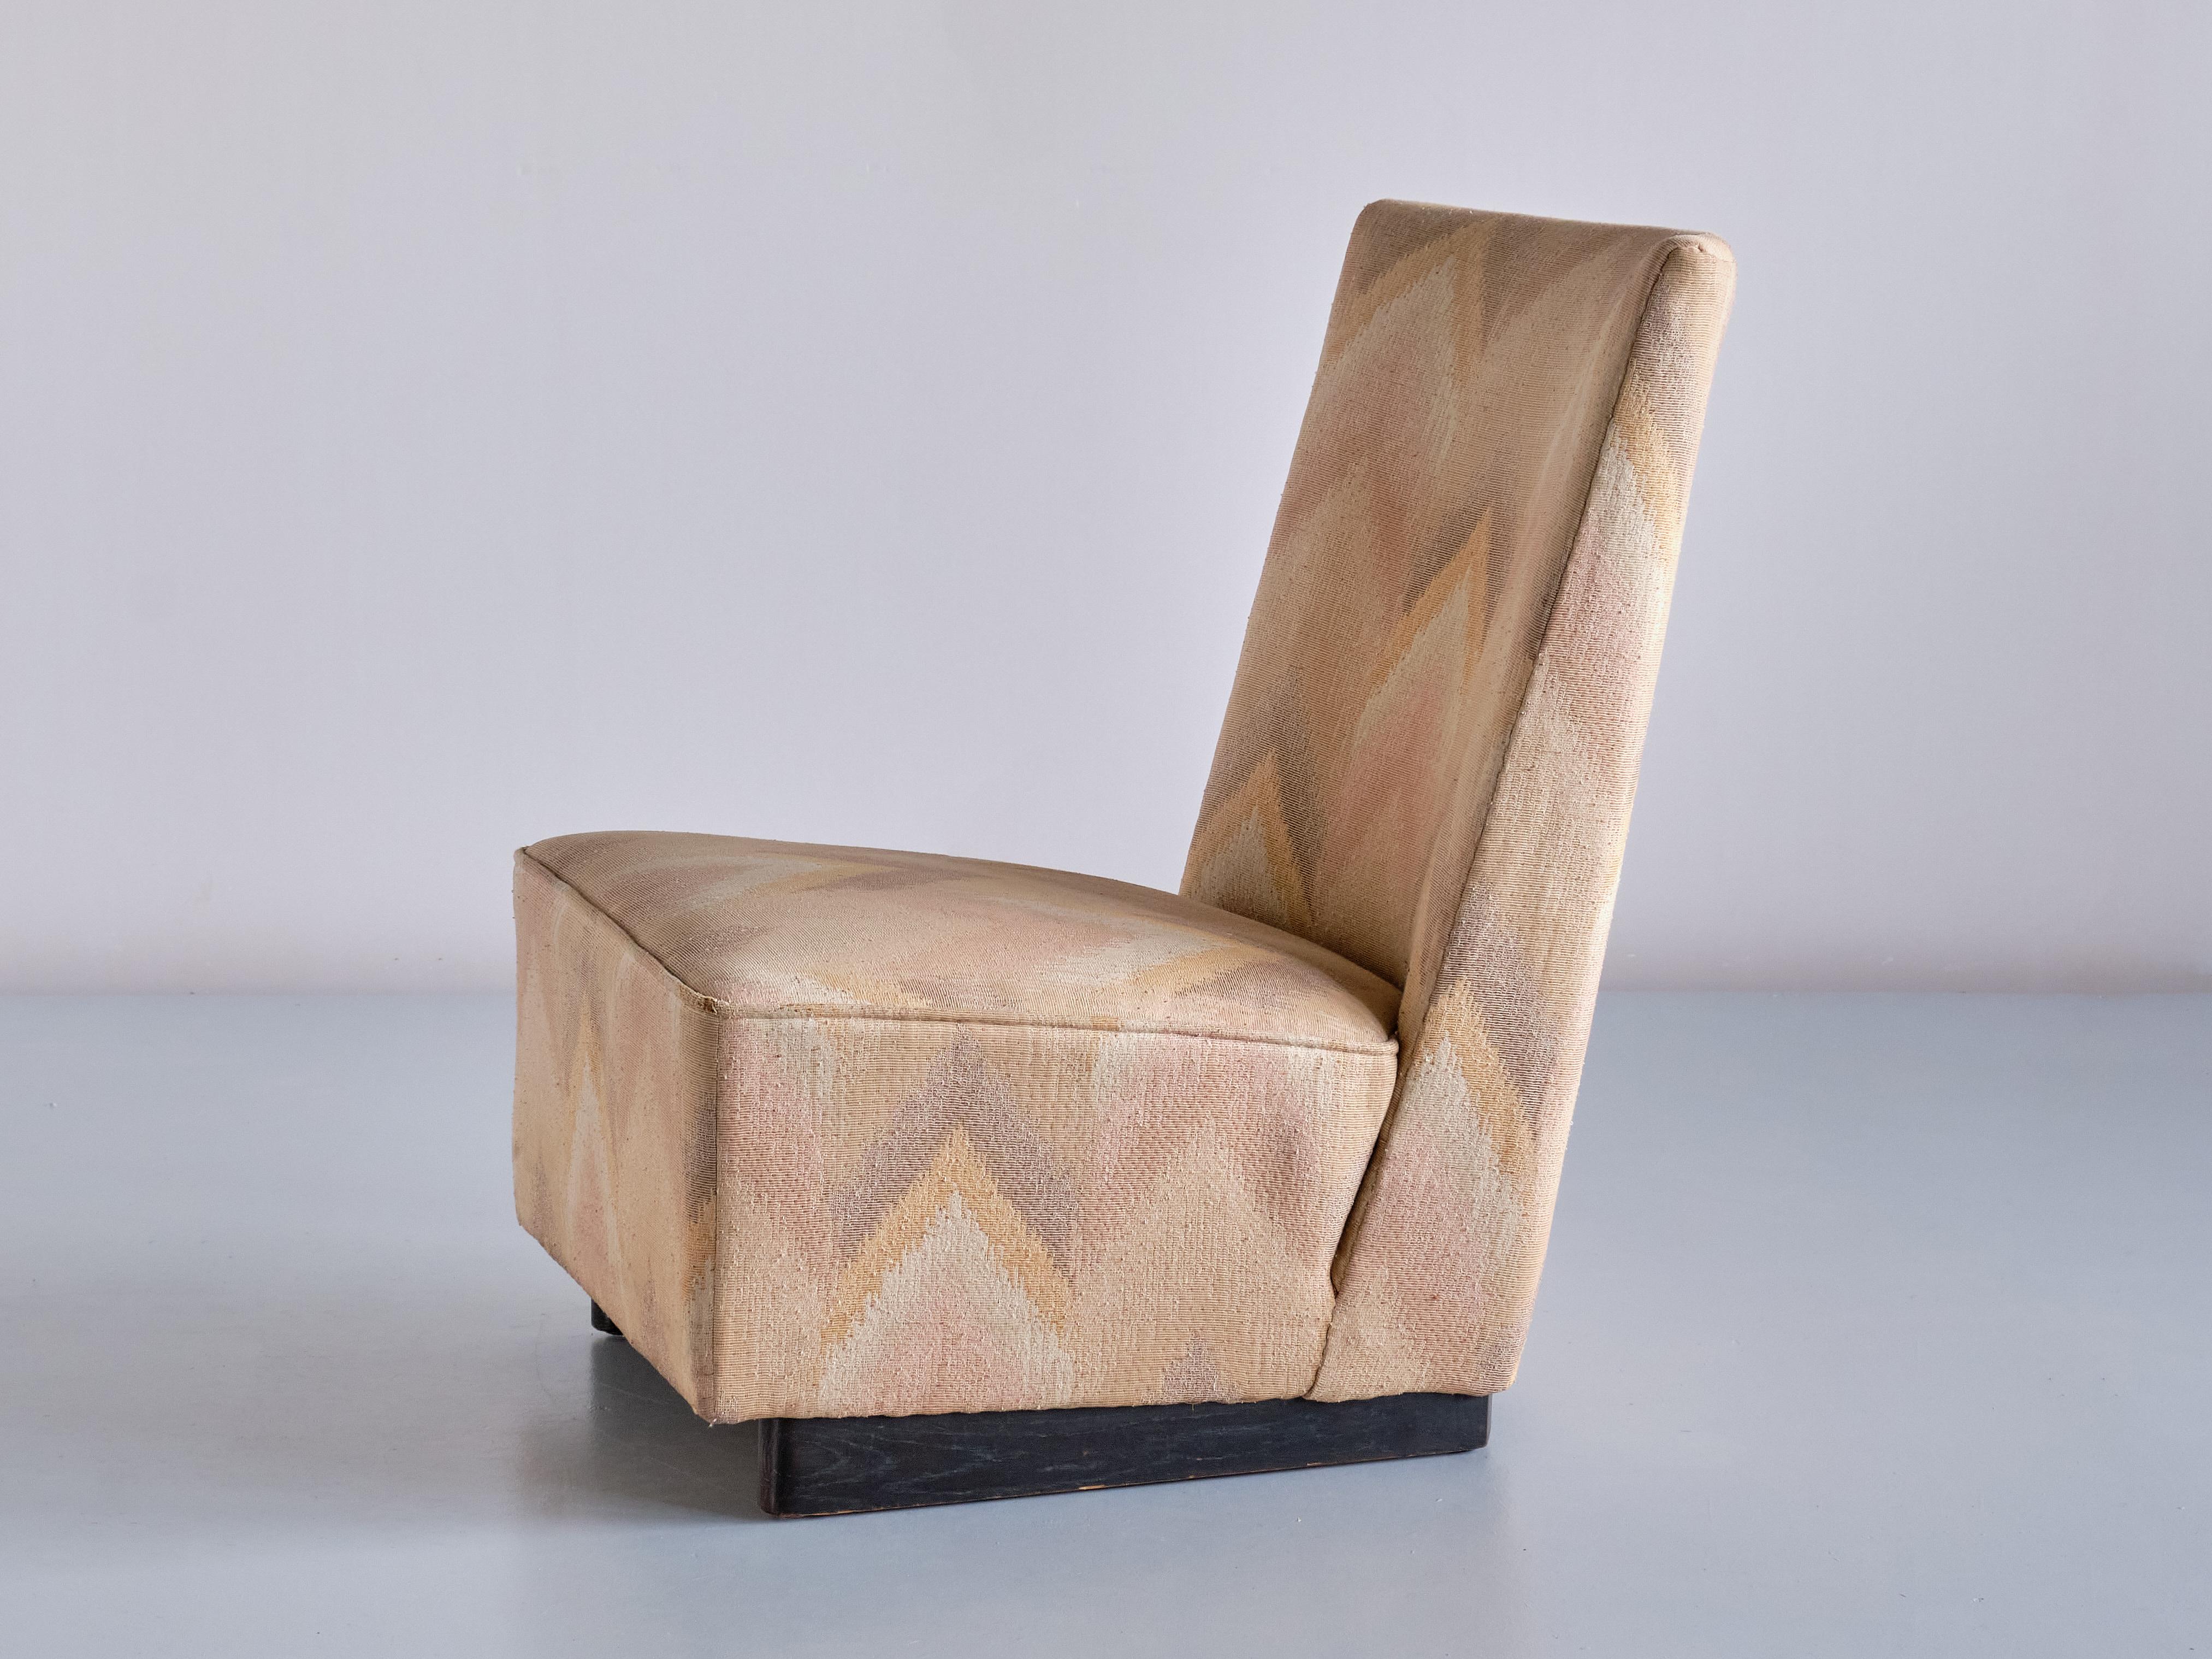 Willem Penaat Modernist Lounge Chair with Runner Legs, Metz & Co, 1935 For Sale 3